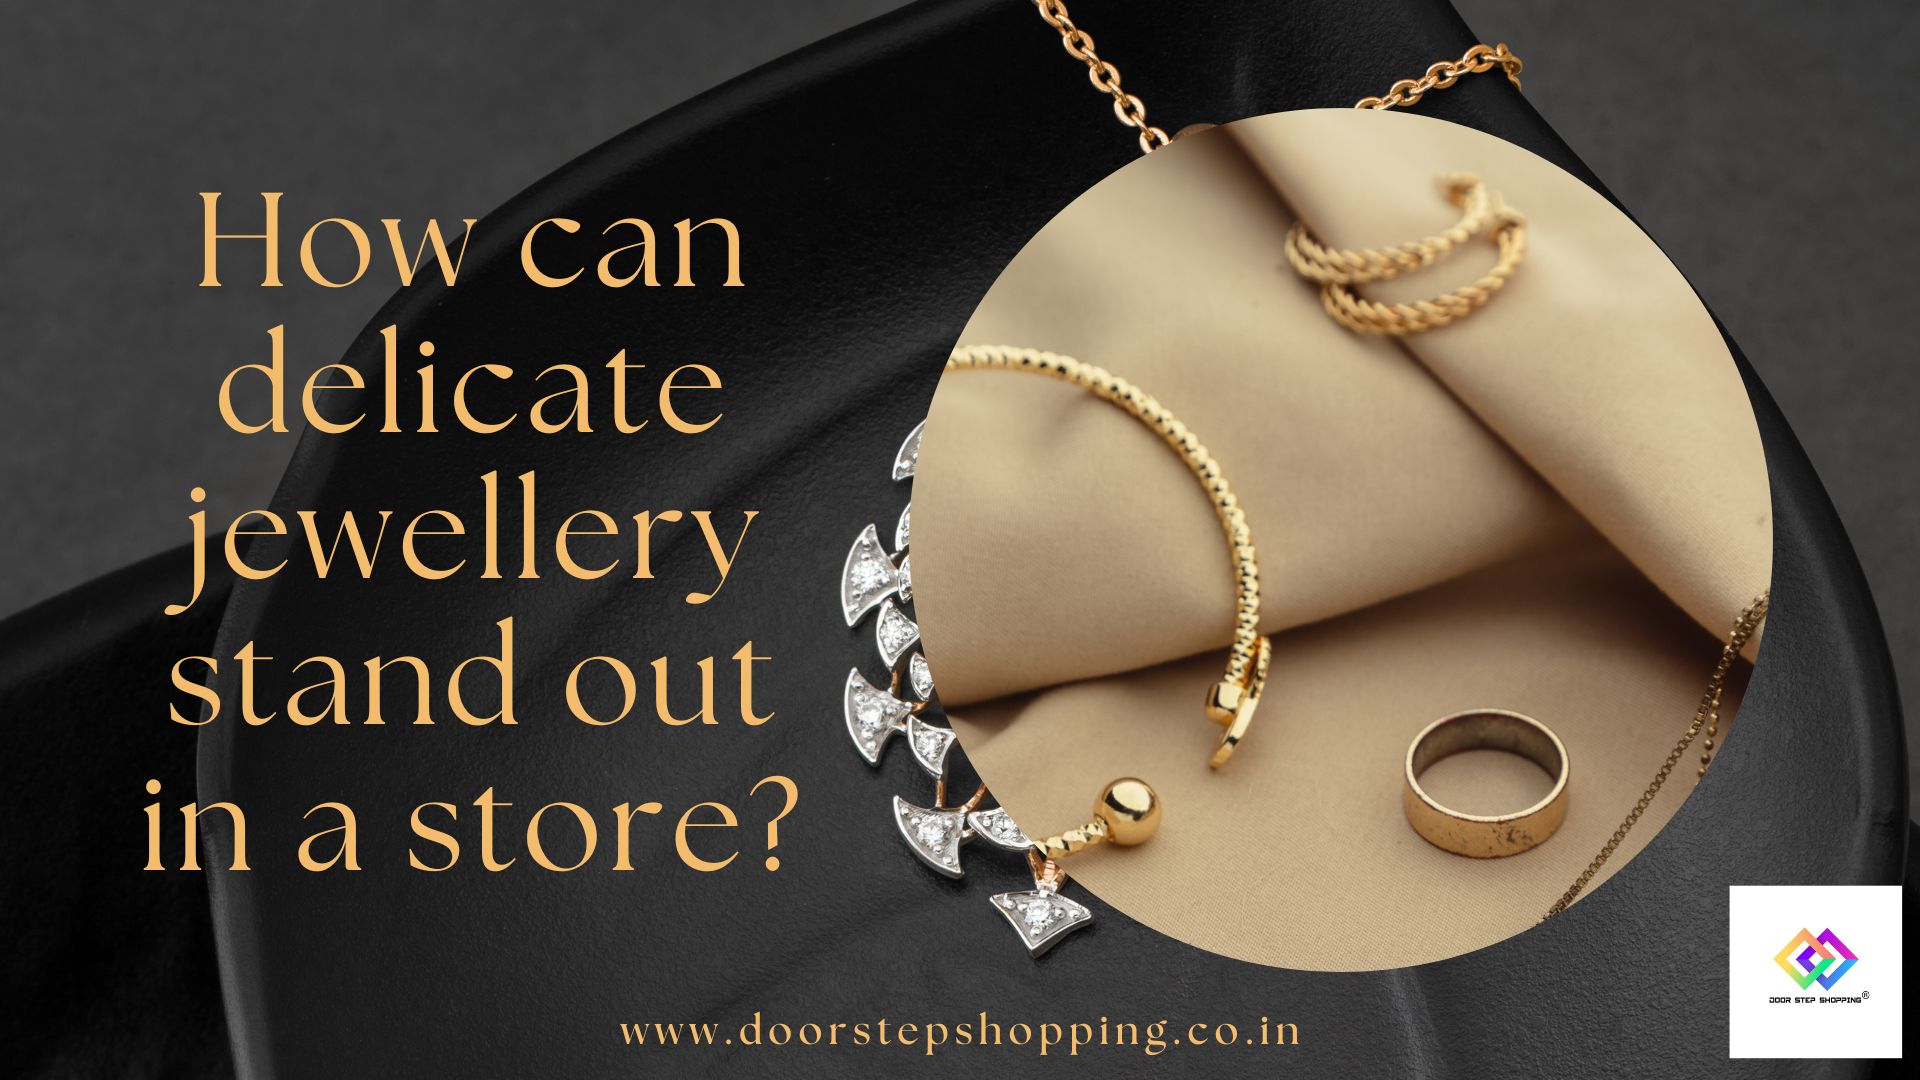 How can delicate jewellery stand out in a store